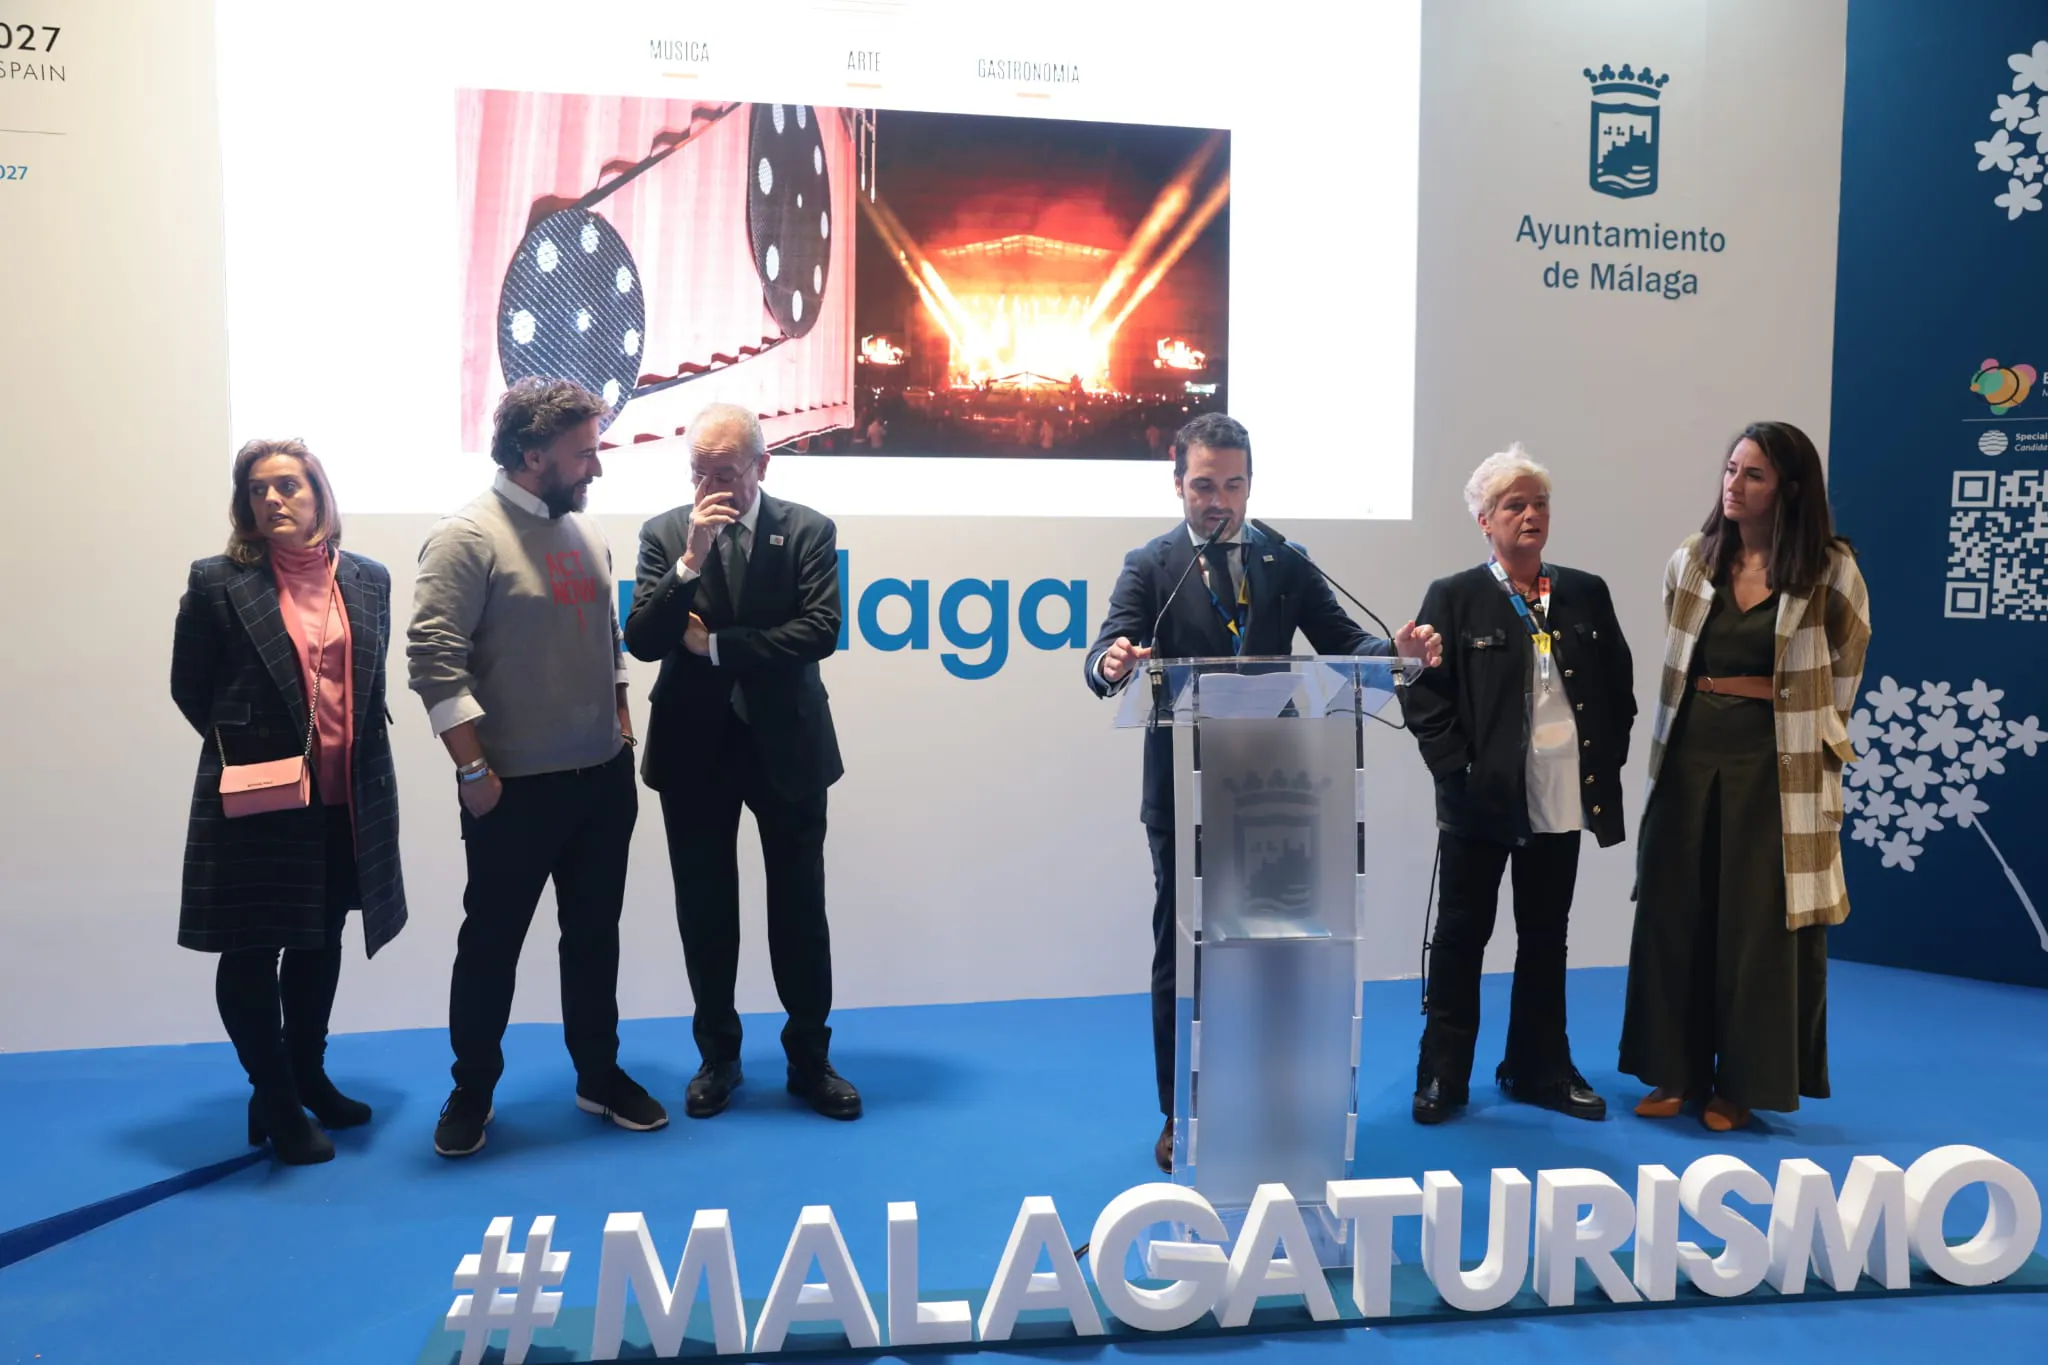 Malaga's presence during the first day of Fitur